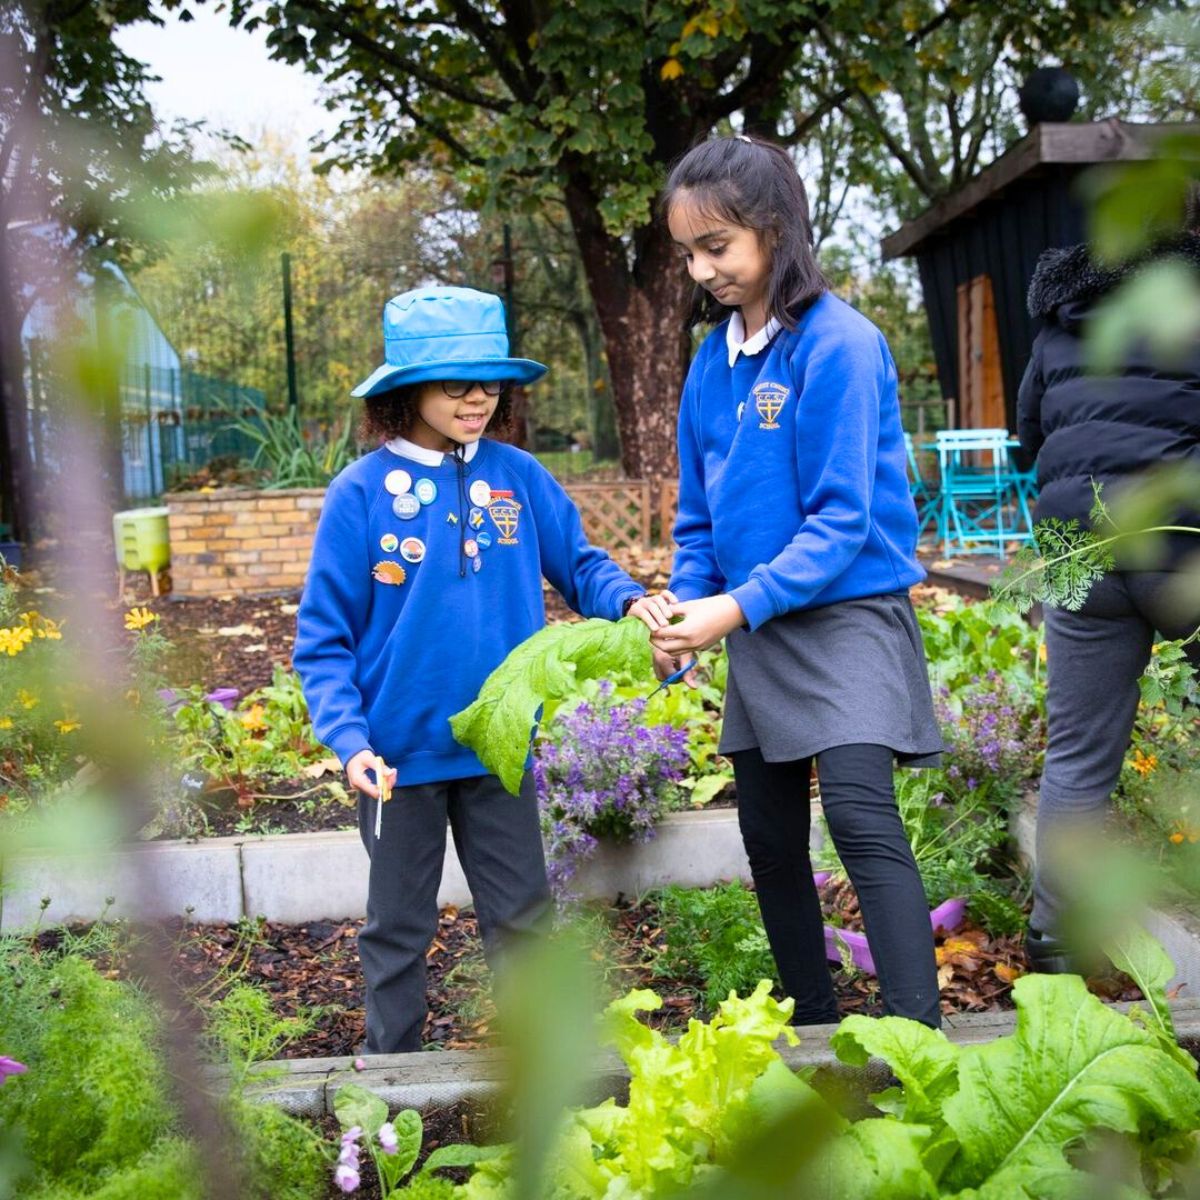 Young children learning to garden